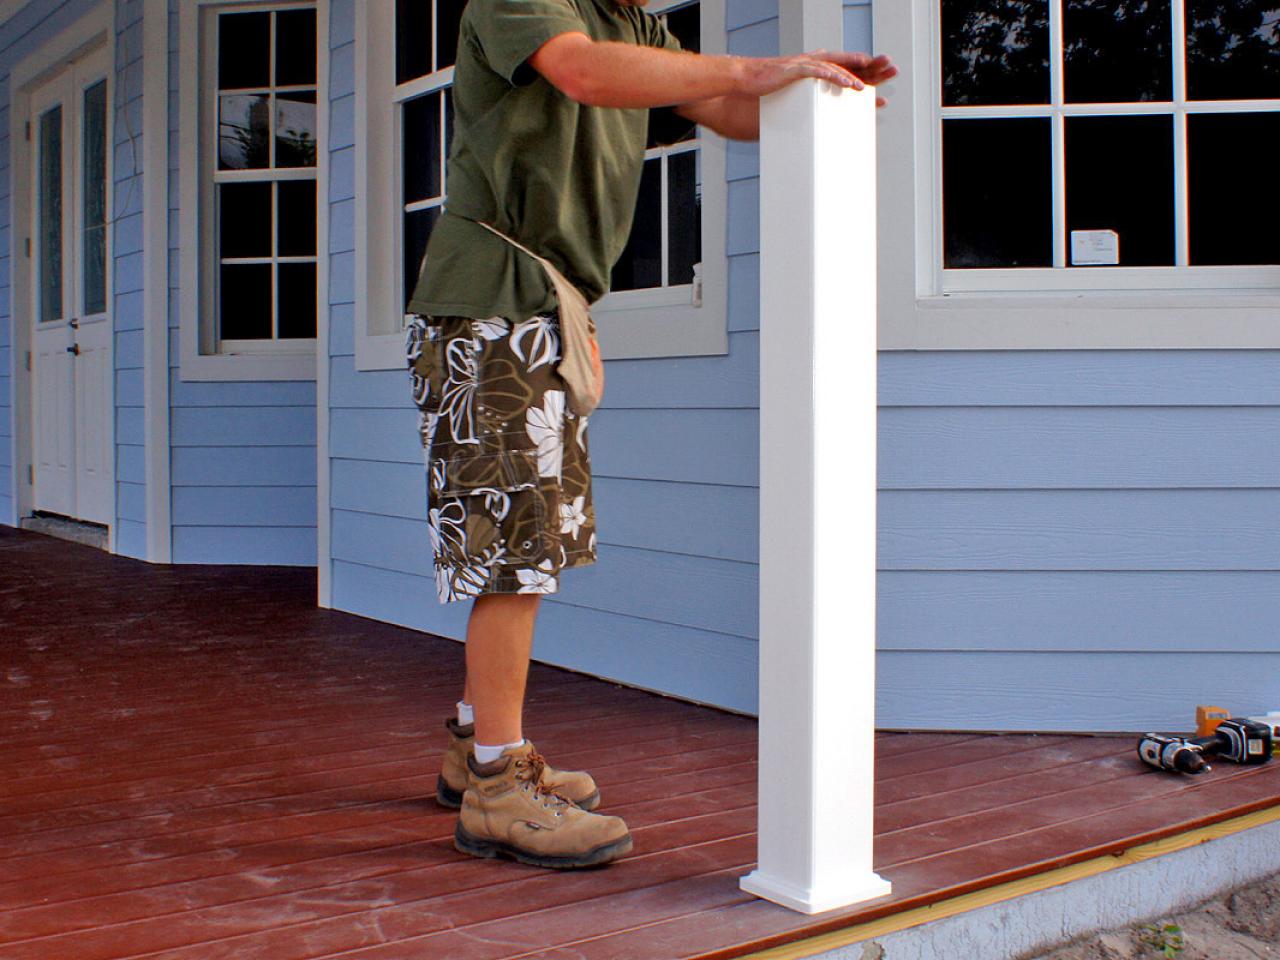 How To Install Railing On Concrete Porch How to Install Porch Railing | HGTV